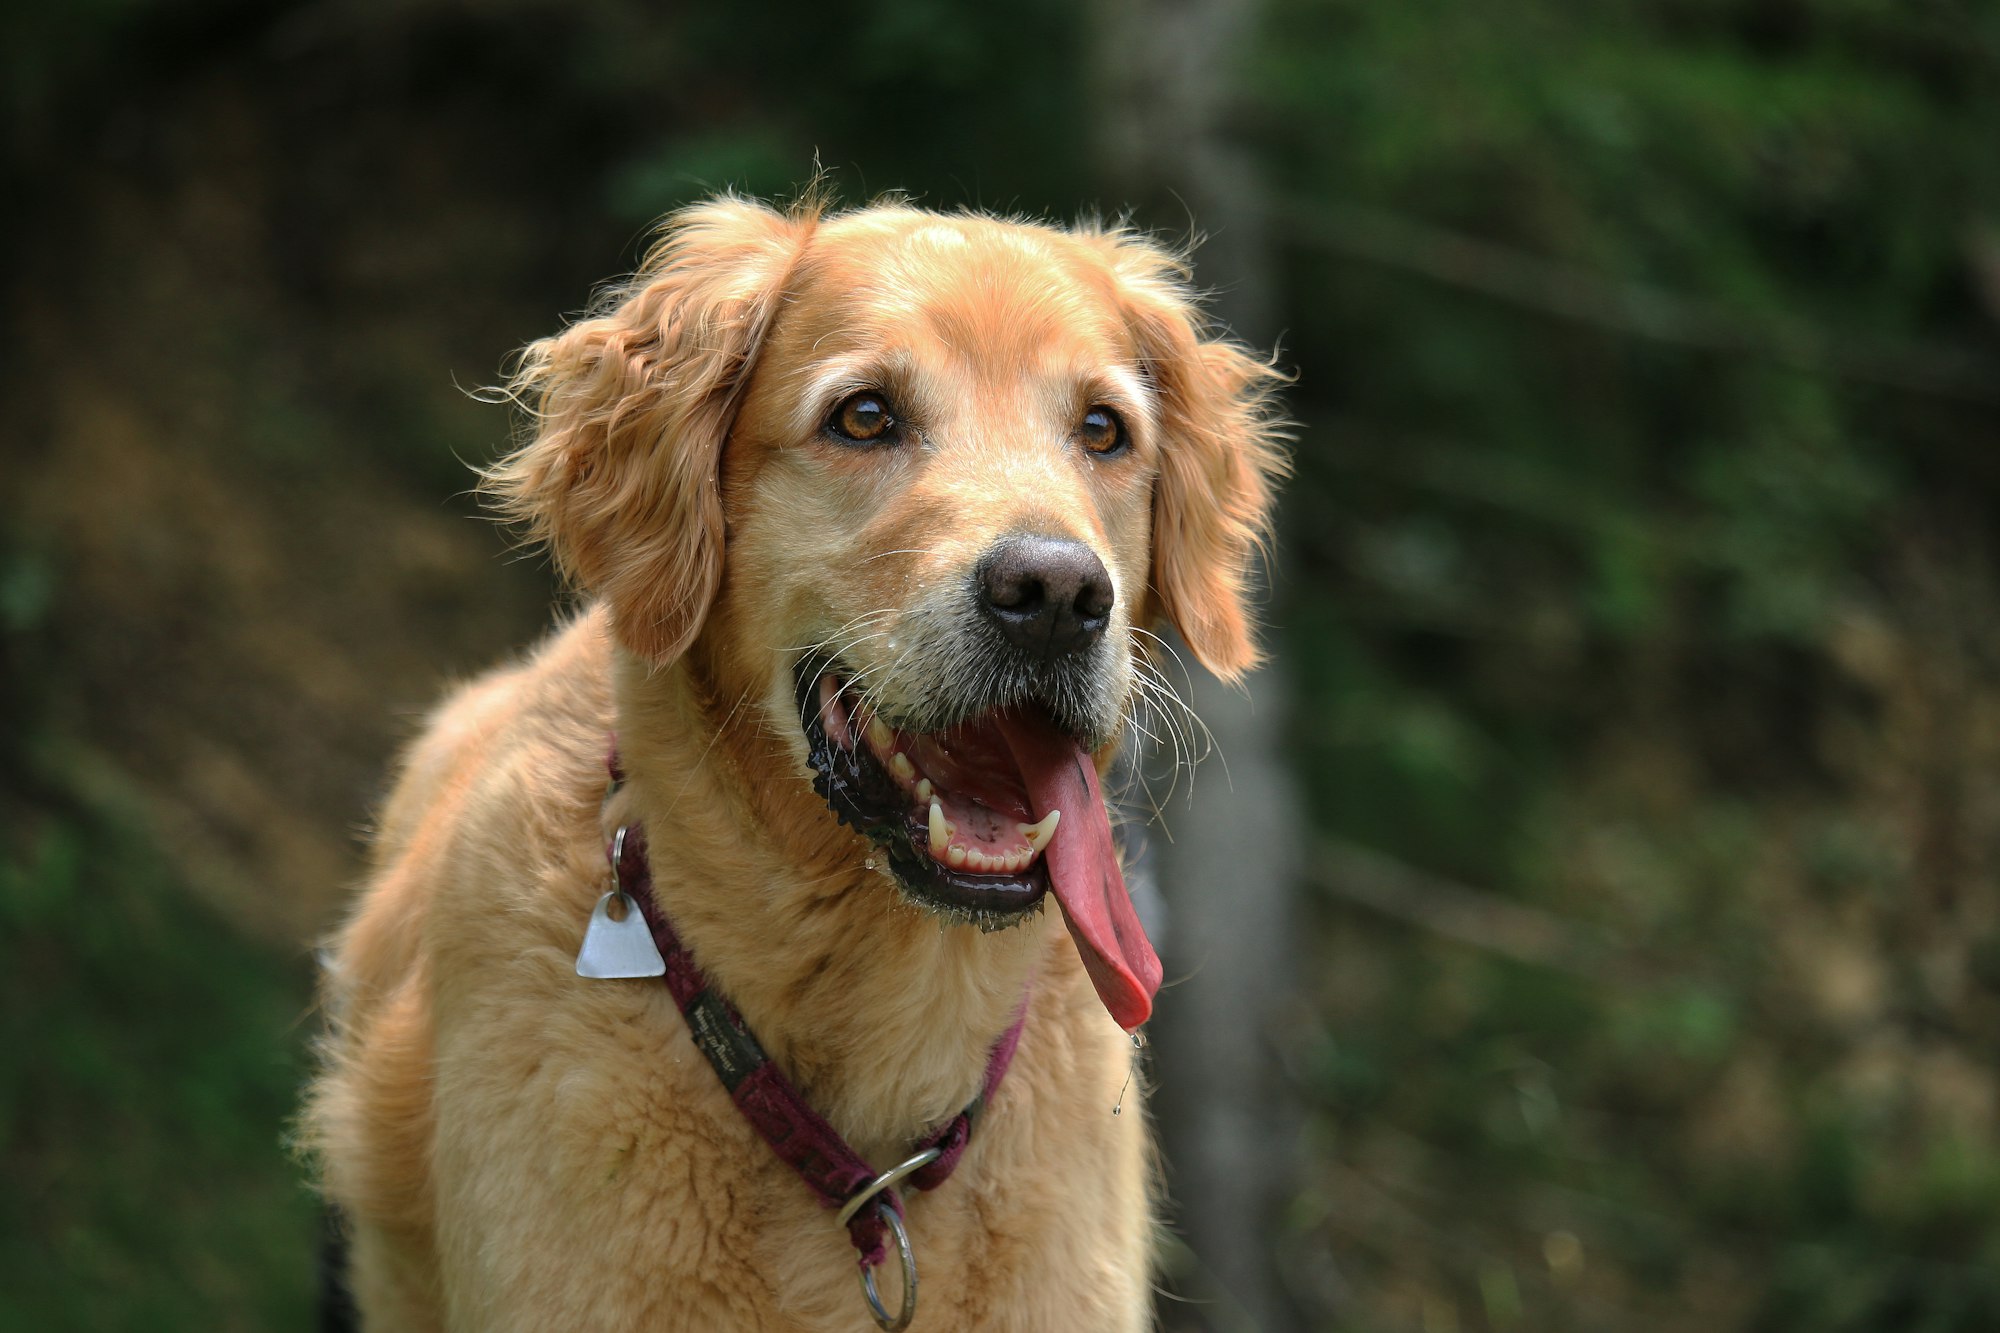 9 year old Golden Retriever. 
Photo was taken when we hiked in the alps to Hochries.